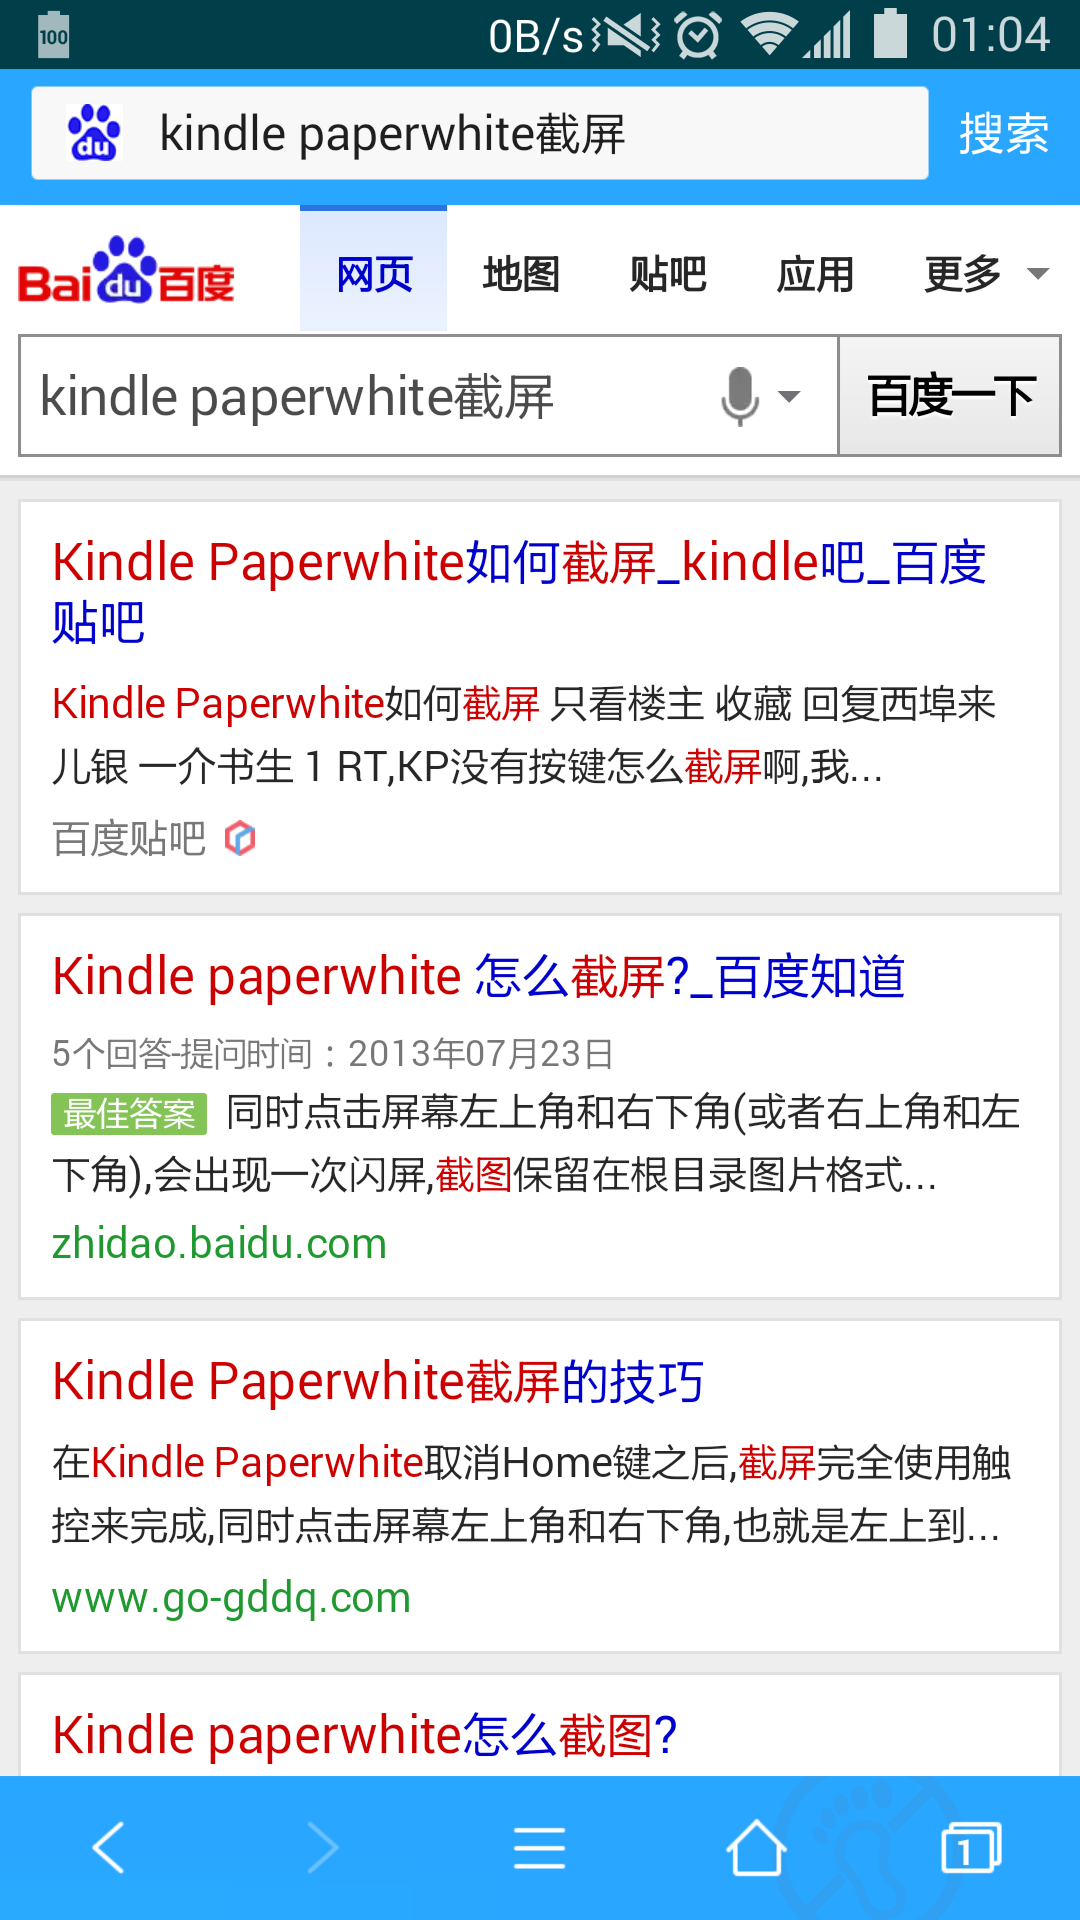 Kindle Paperwhite 如何截屏? - Kindle Paperwh